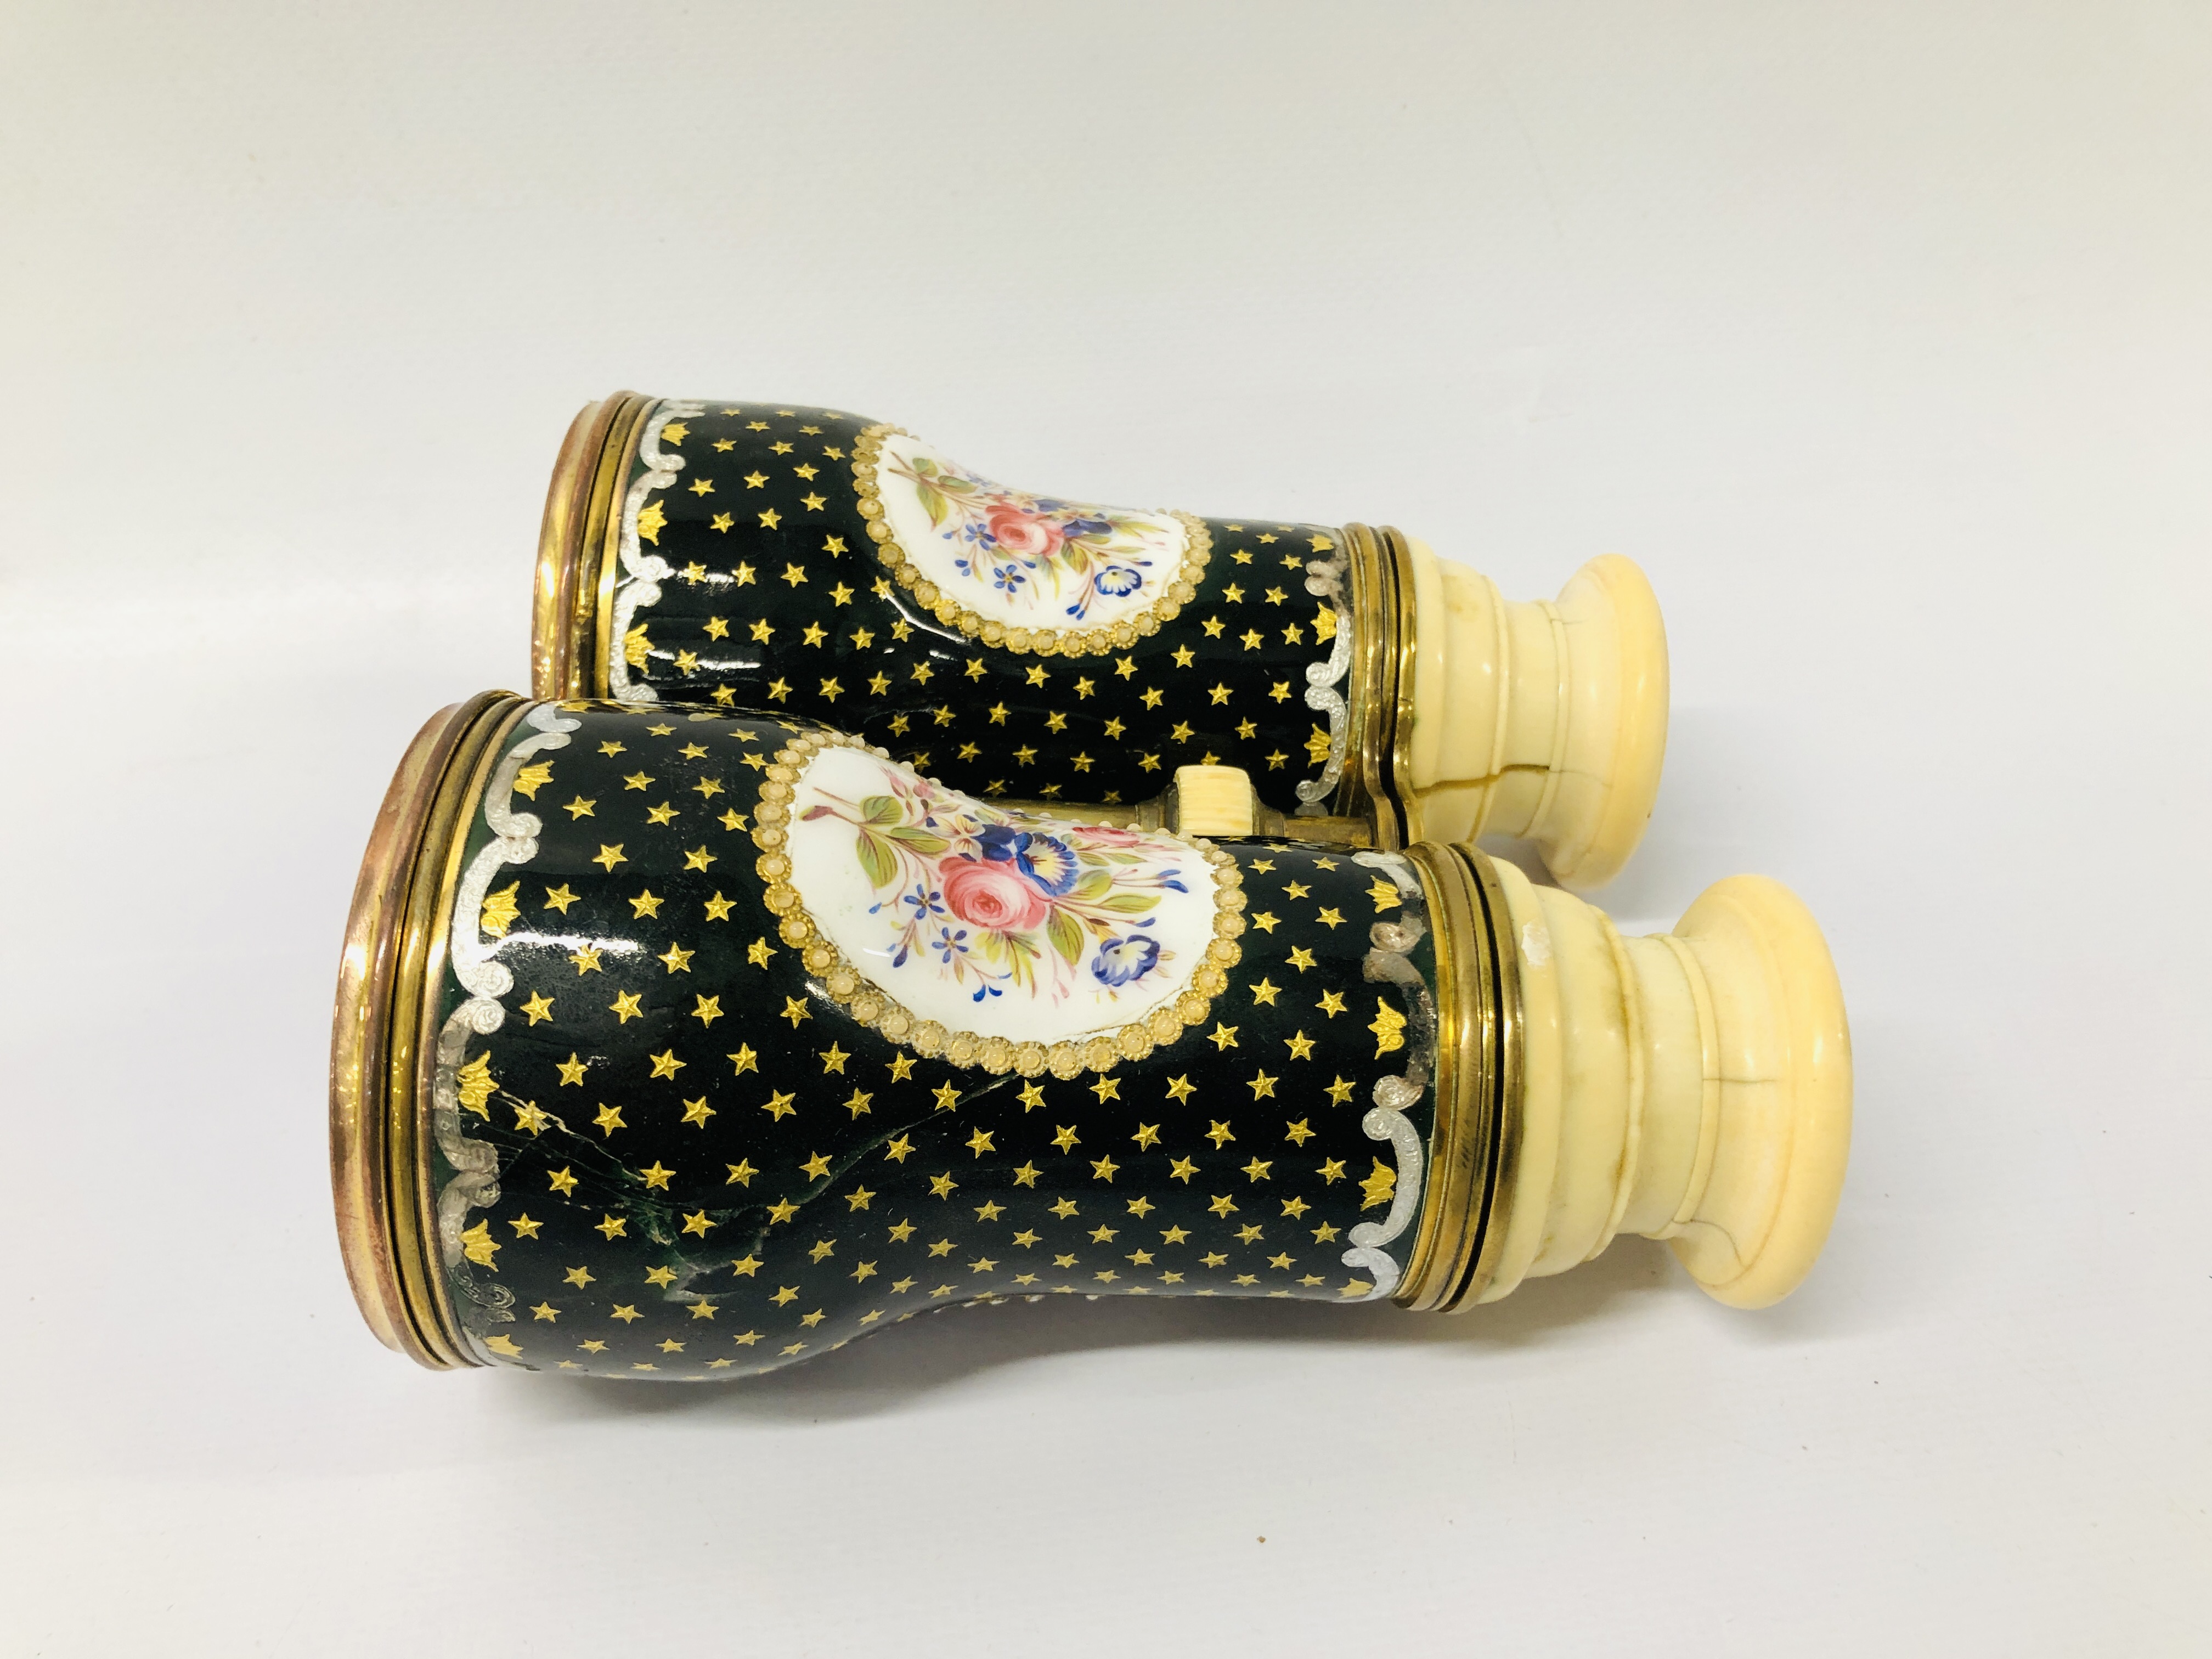 PAIR OF ANTIQUE IVORY AND ENAMEL OPERA GLASSES C1880 - Image 4 of 8